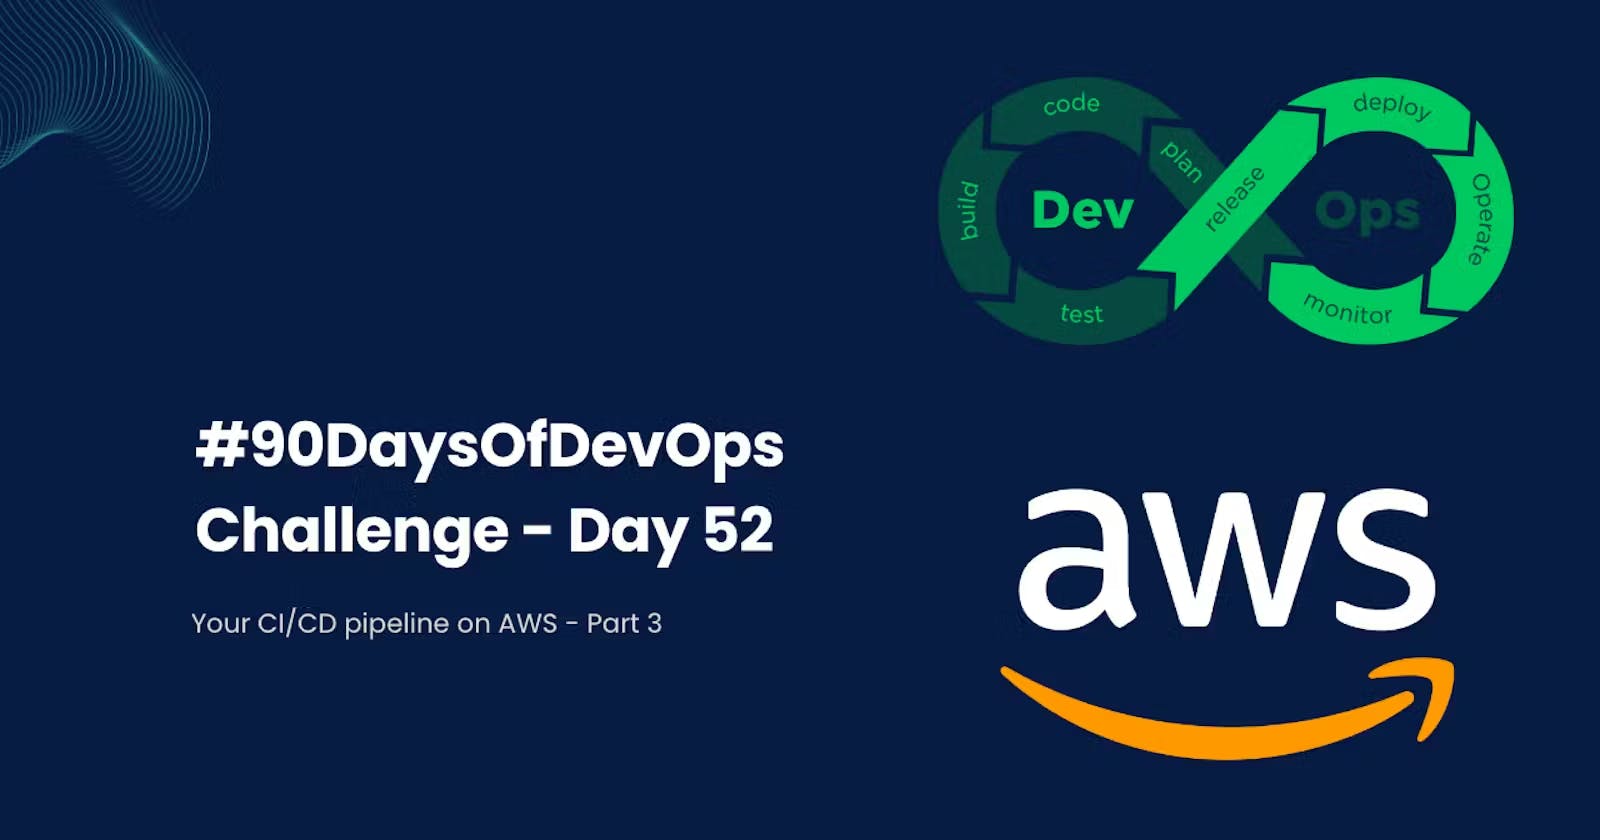 Day 52: Your CI/CD pipeline on AWS - Part 3 🚀 ☁